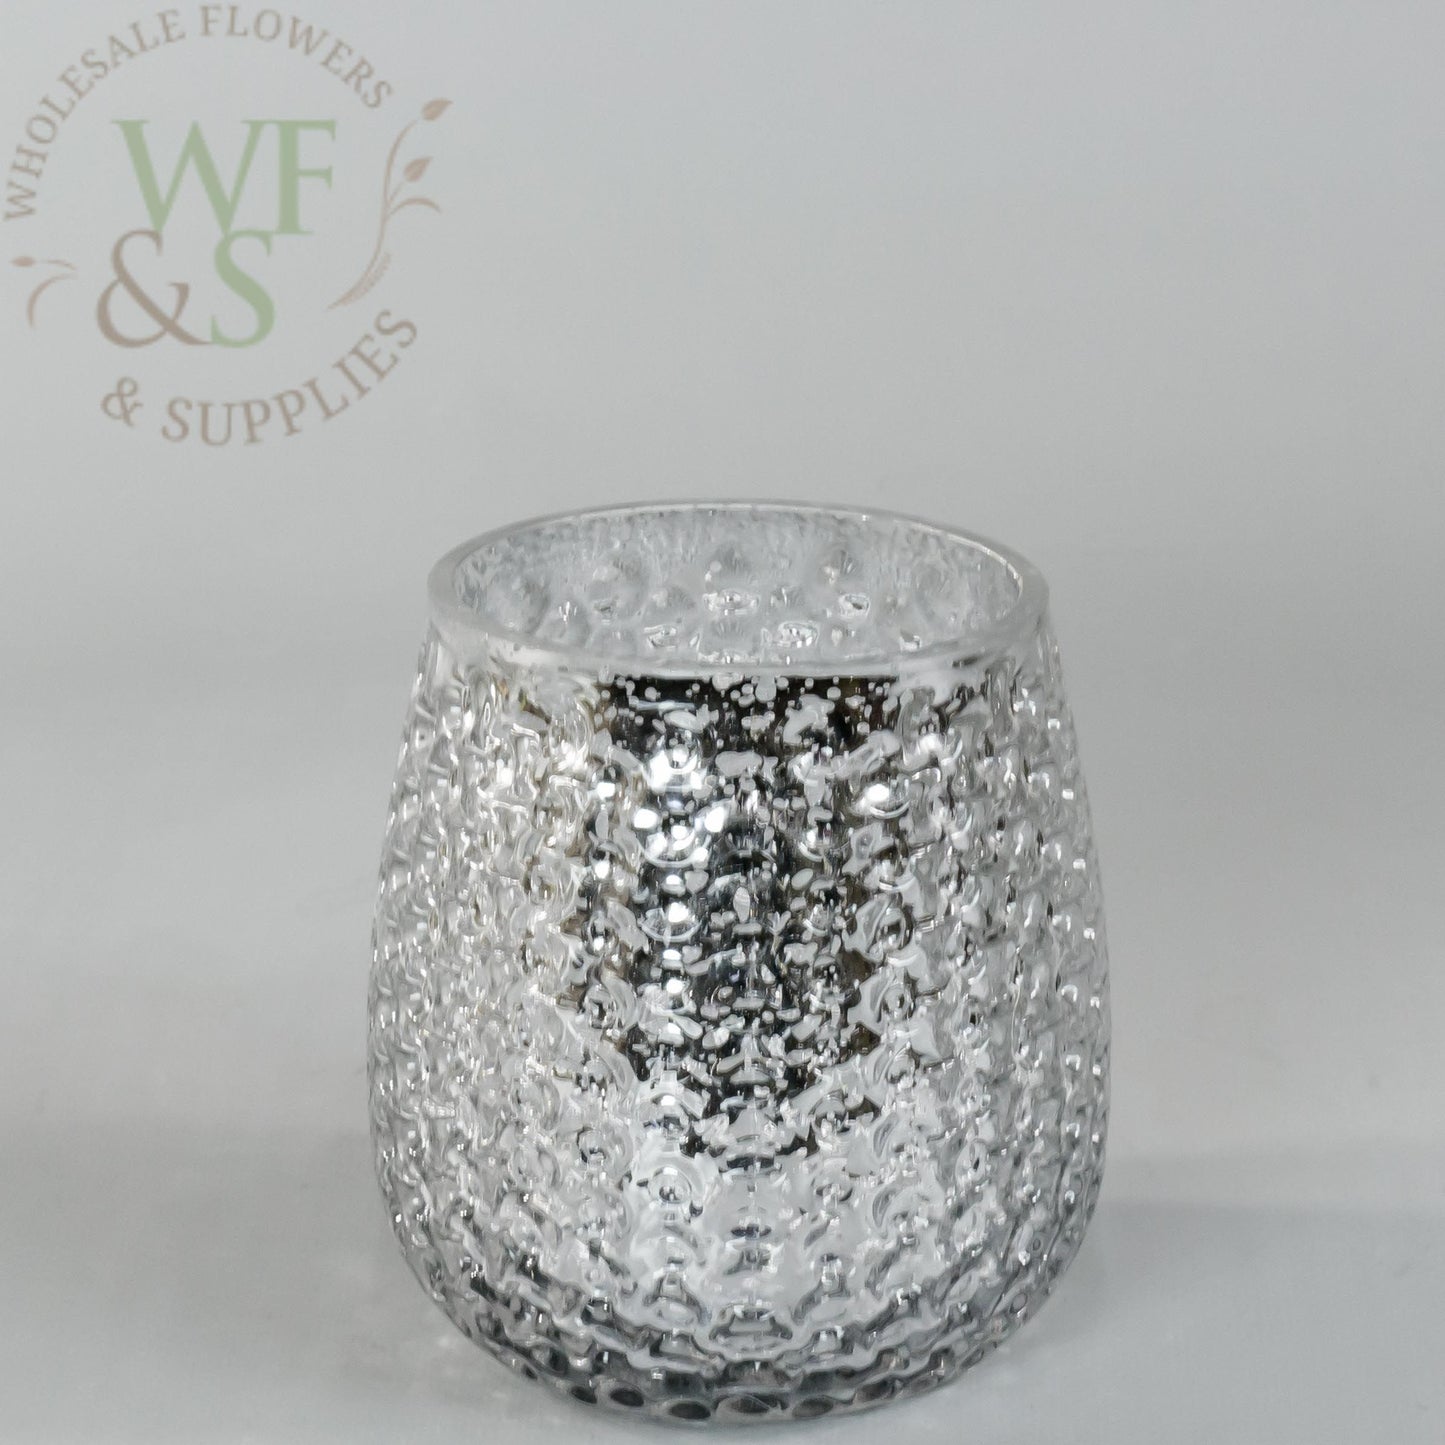 Silver Mercury Glass Bubbled Vase Candle Holder